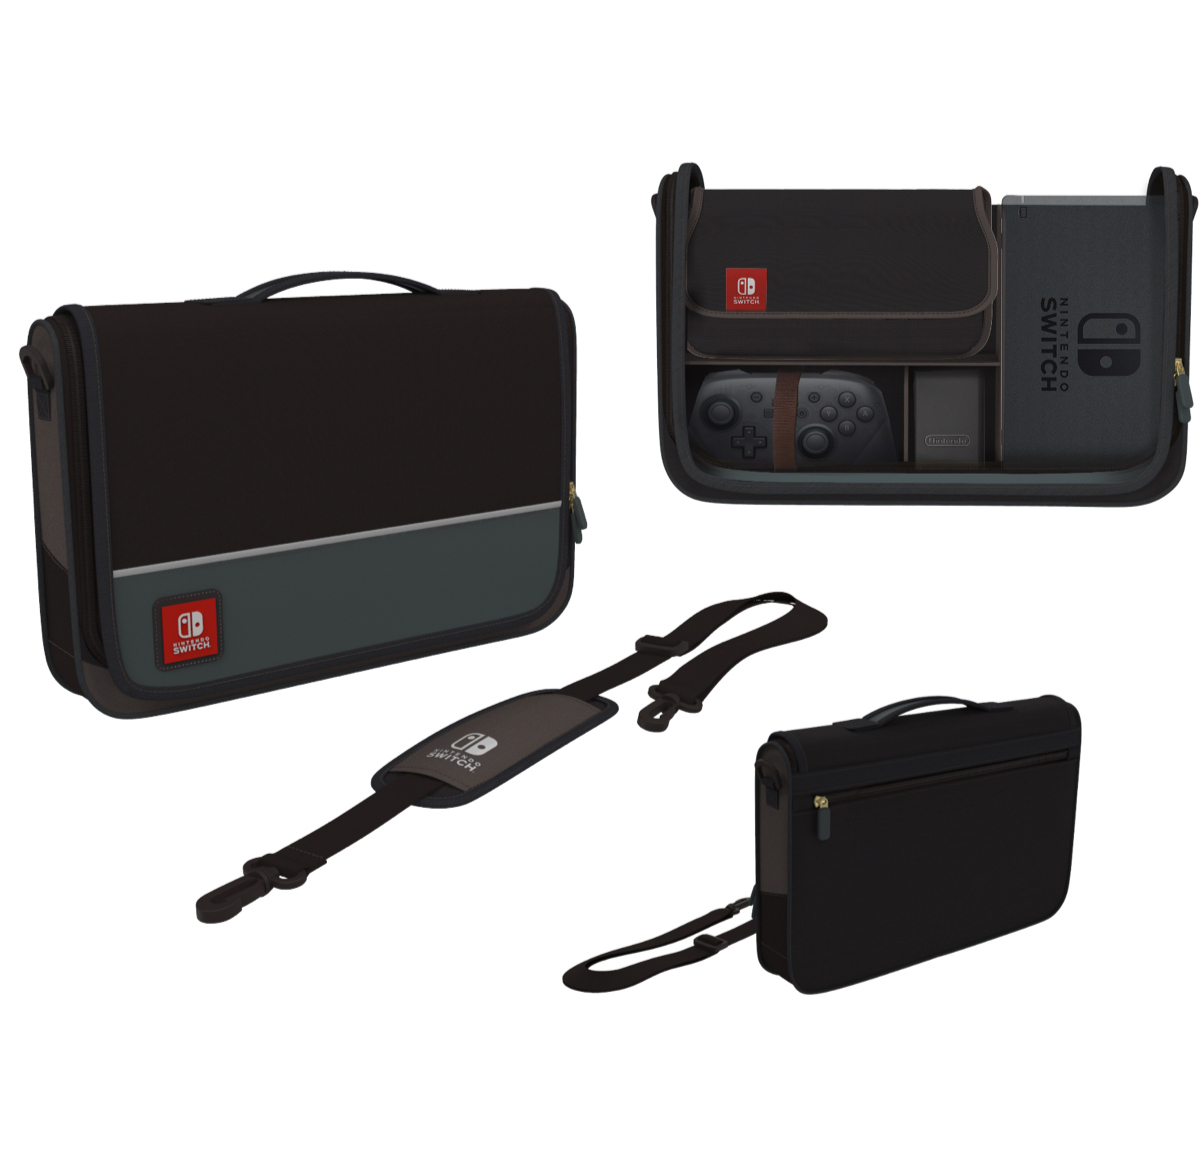 https://www.reference-gaming.com/assets/media/product/109593/power-a-everywhere-messenger-bag-for-nintendo-switch-new-2020-5f52661d78bba.jpg?format=product-cover-large&k=1606492964